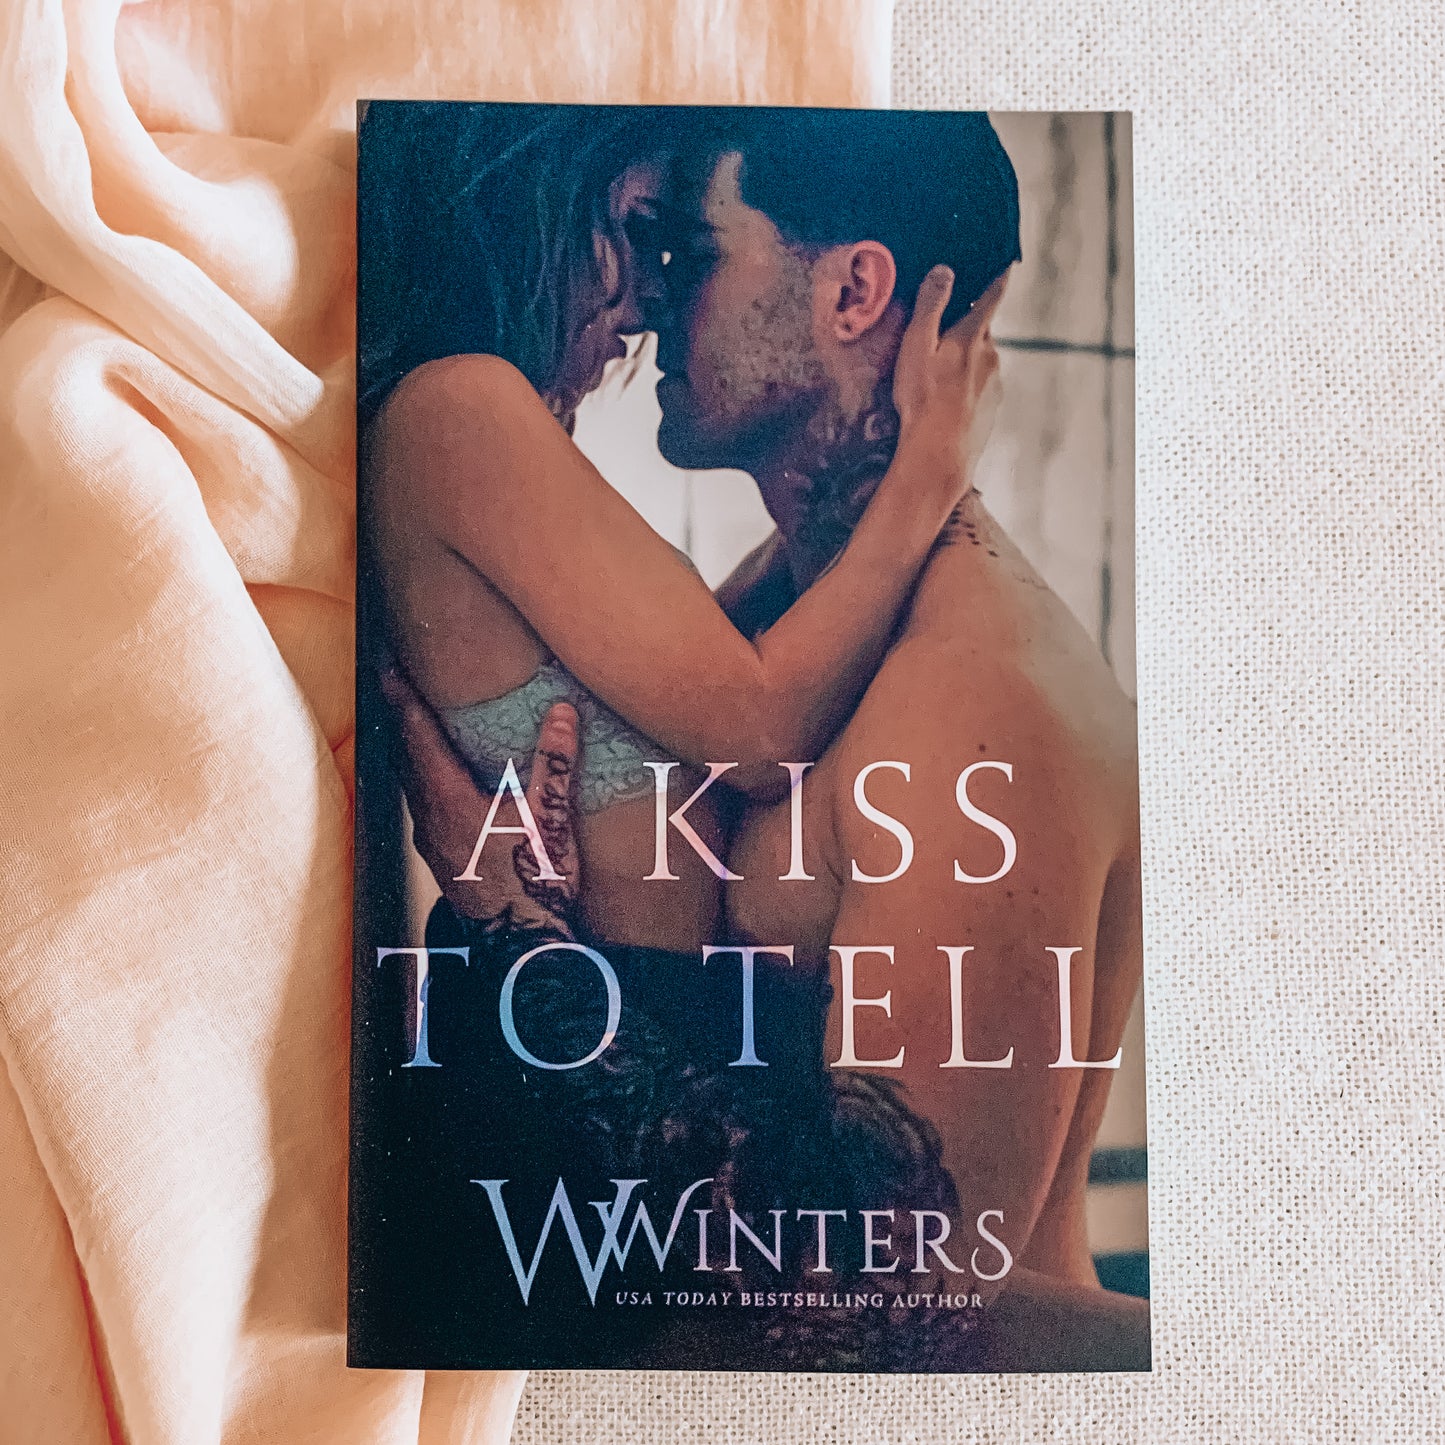 A Kiss to Tell by Willow Winters